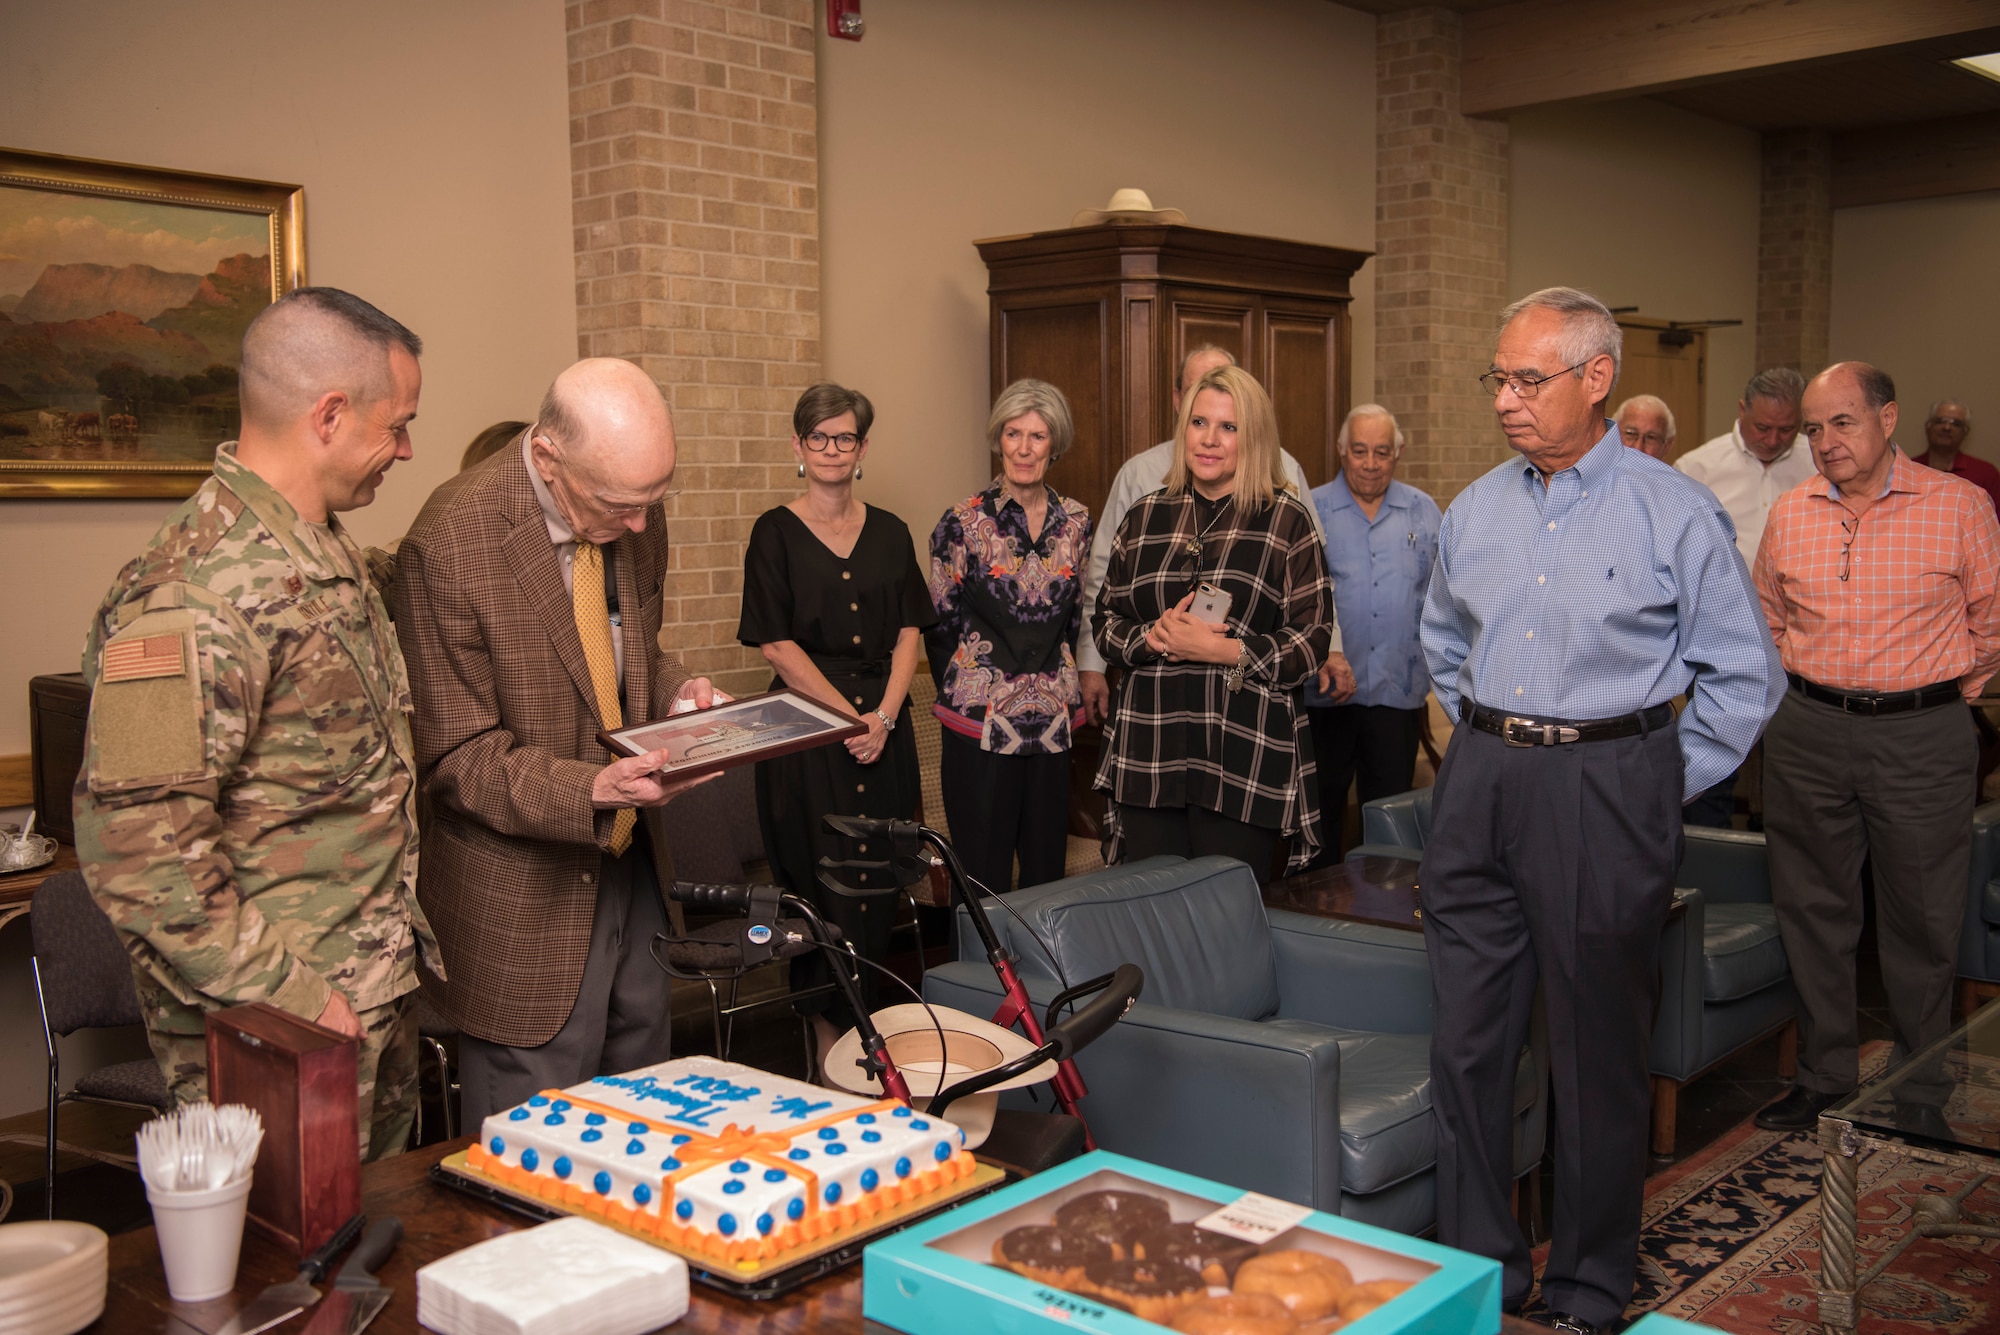 Members gather to celebrate Bill Cauthorn’s, lifetime honorary commander and CEO of The Bank and Trust, recognition from Col. Lee Gentile, 47th Flying Training Wing commander, in Del Rio, Texas, Oct. 15, 2019. Cauthorn received a custom belt buckle as a gift for his lifelong commitment to Laughlin Air Force Base. (U.S. Air Force photo by Senior Airman Marco A. Gomez)